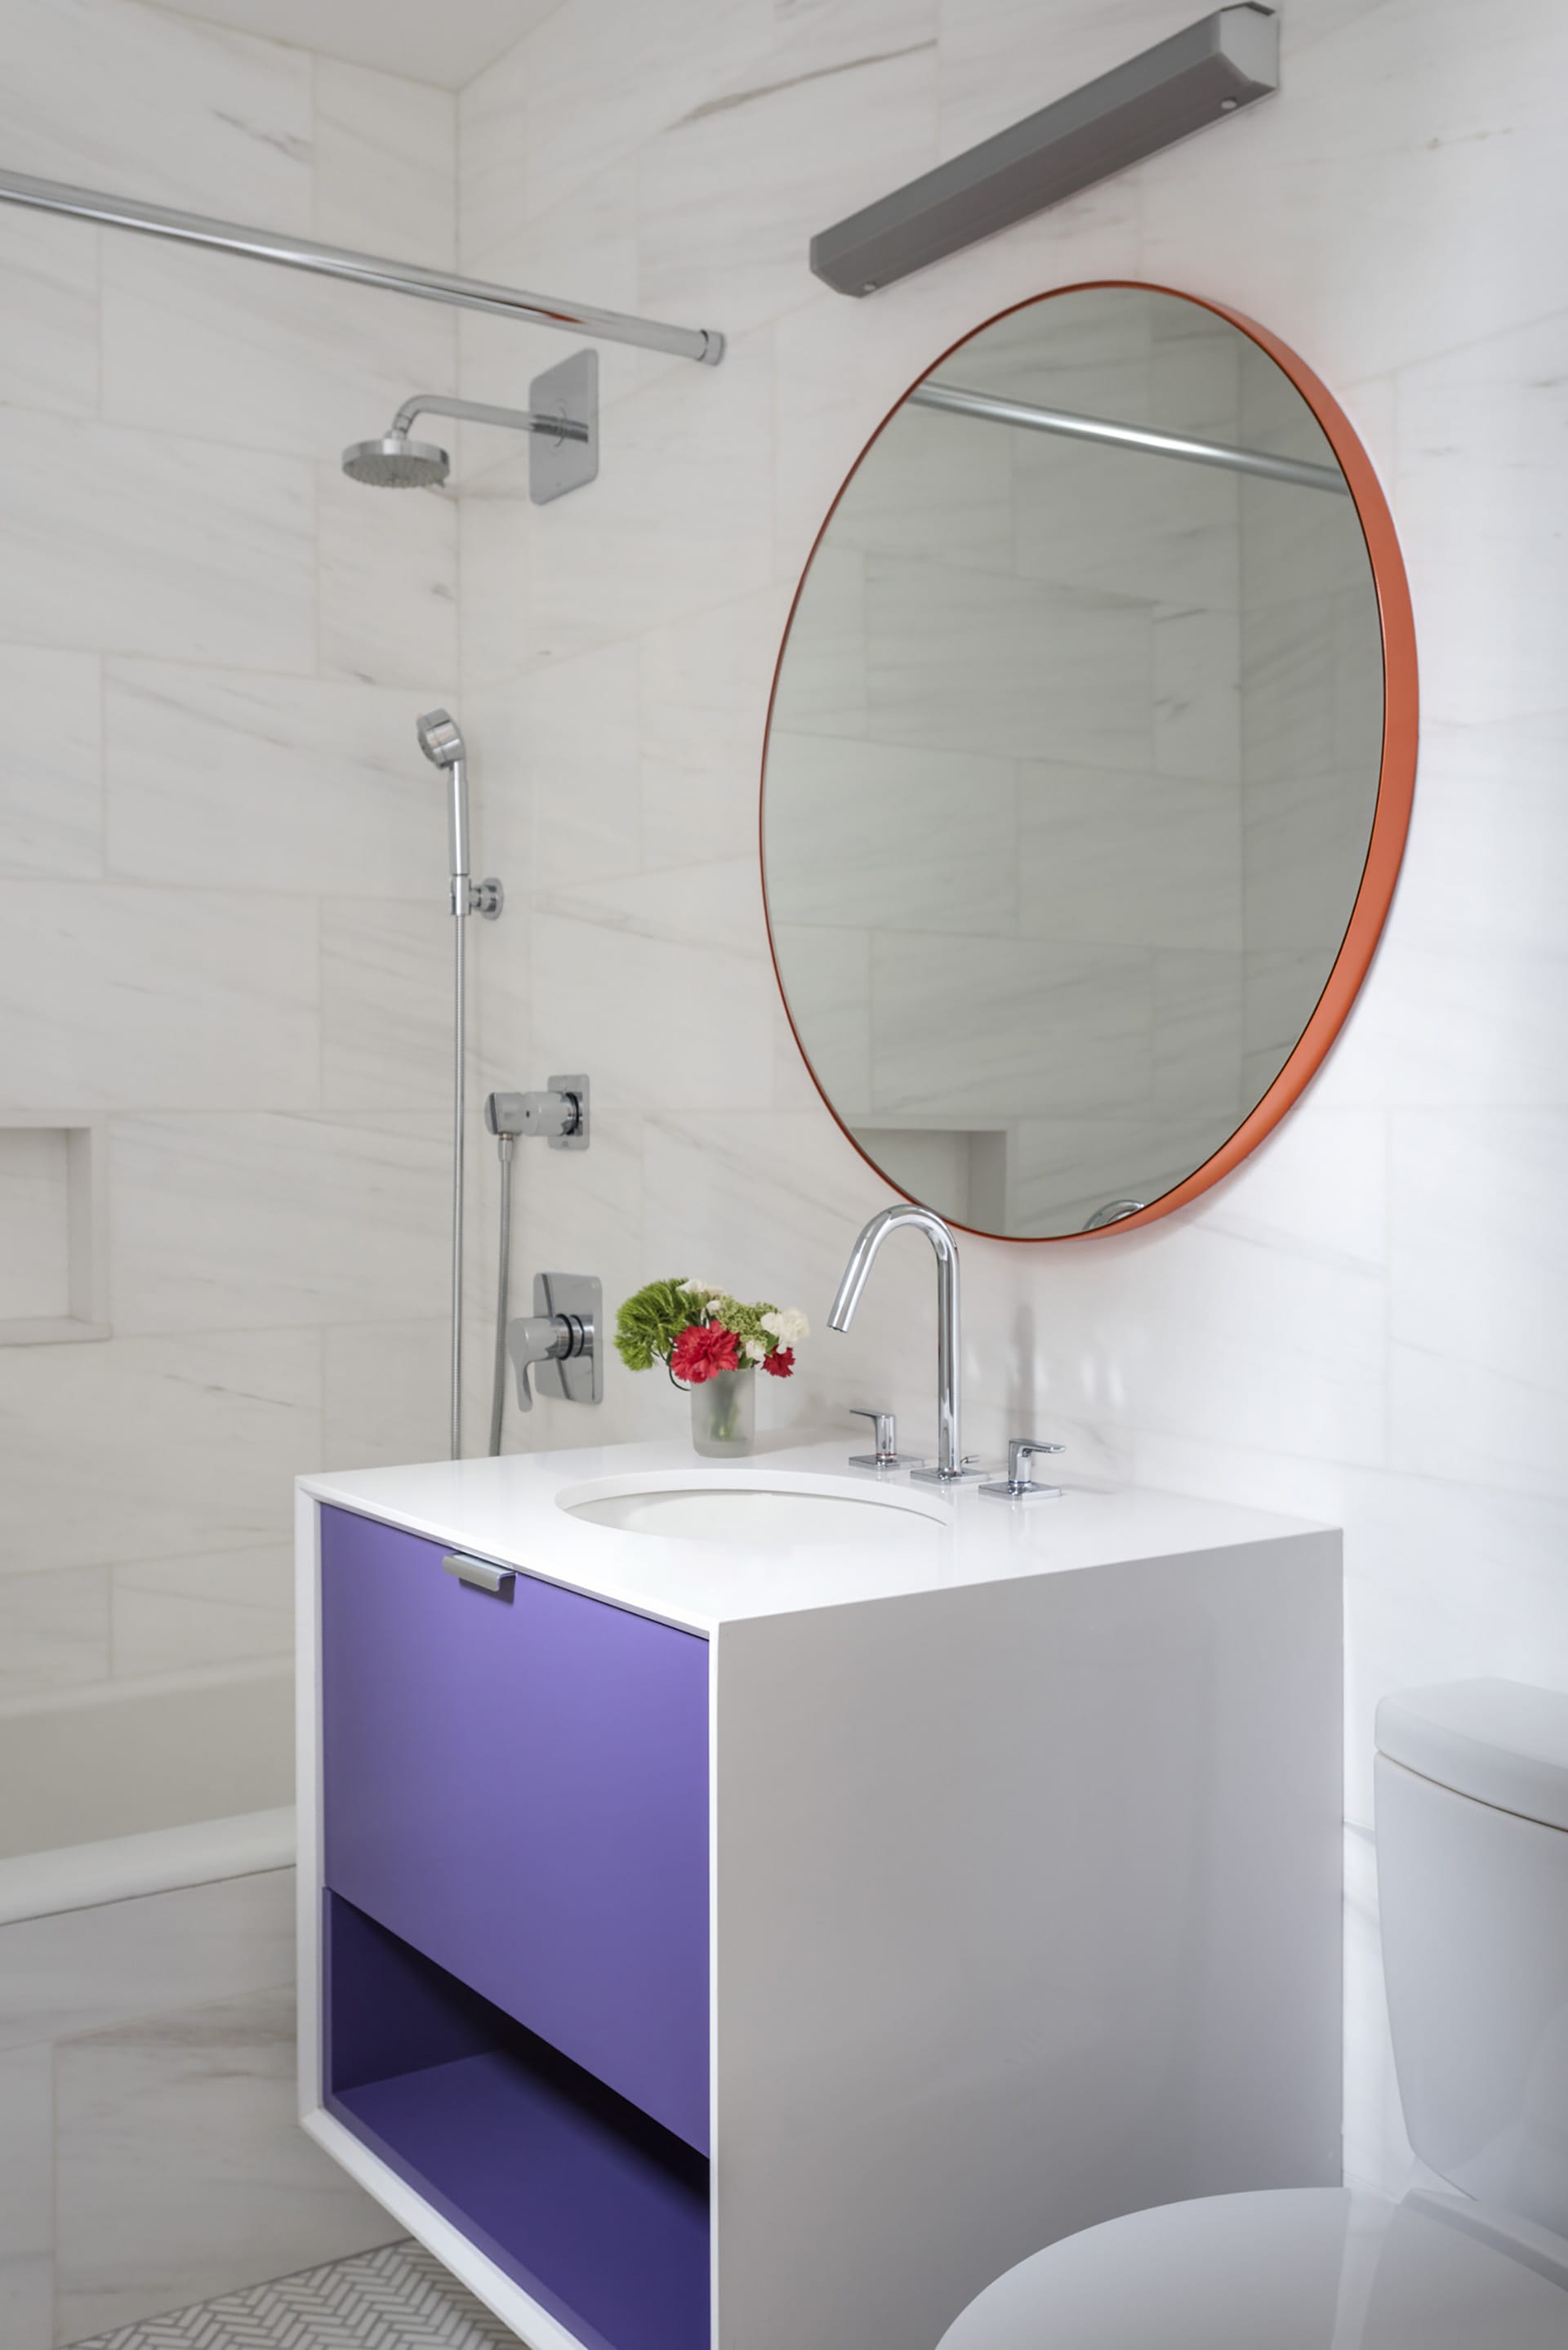 Floating vanity in an all-white bathroom with purple drawers